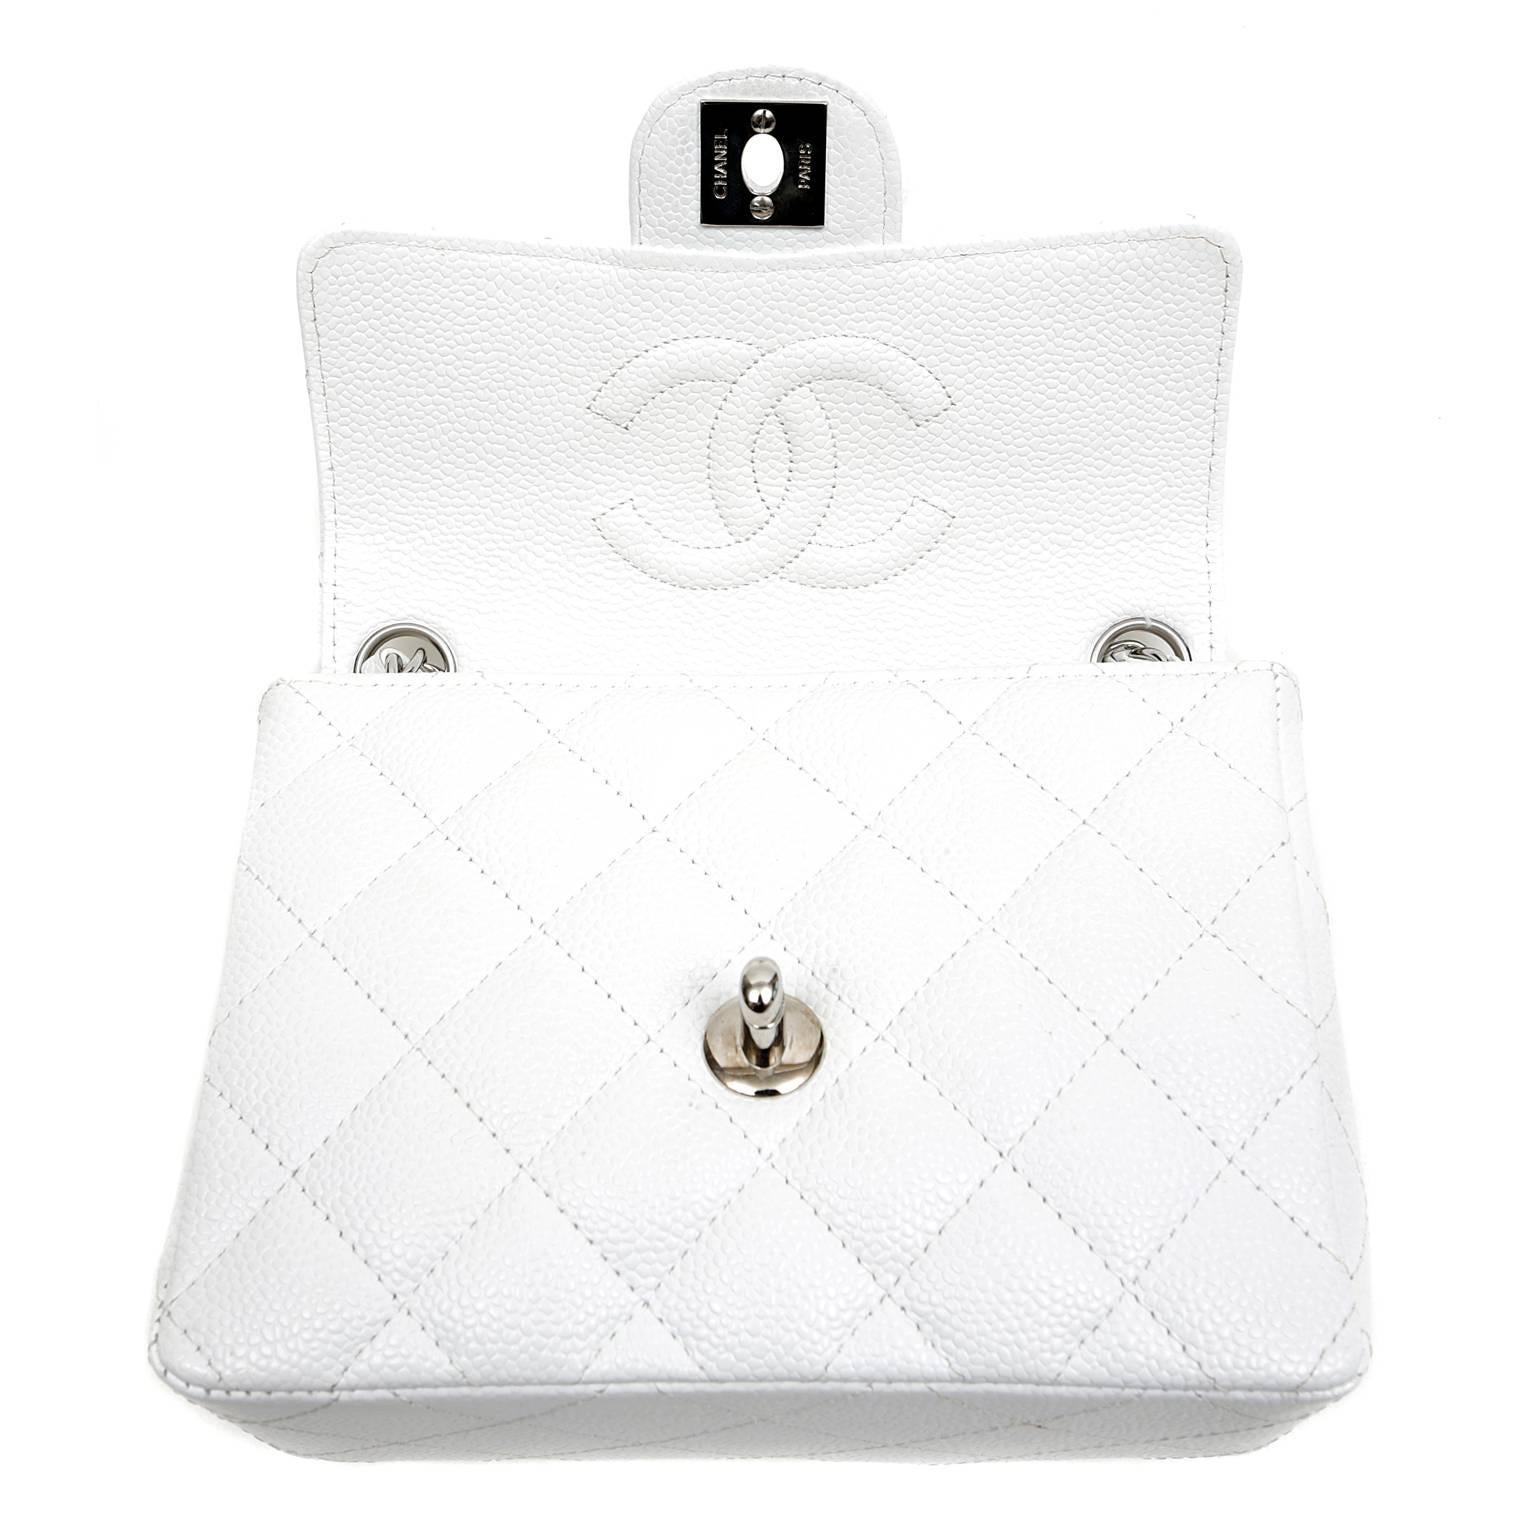 Women's Chanel White Caviar Leather Mini Classic Flap with Silver